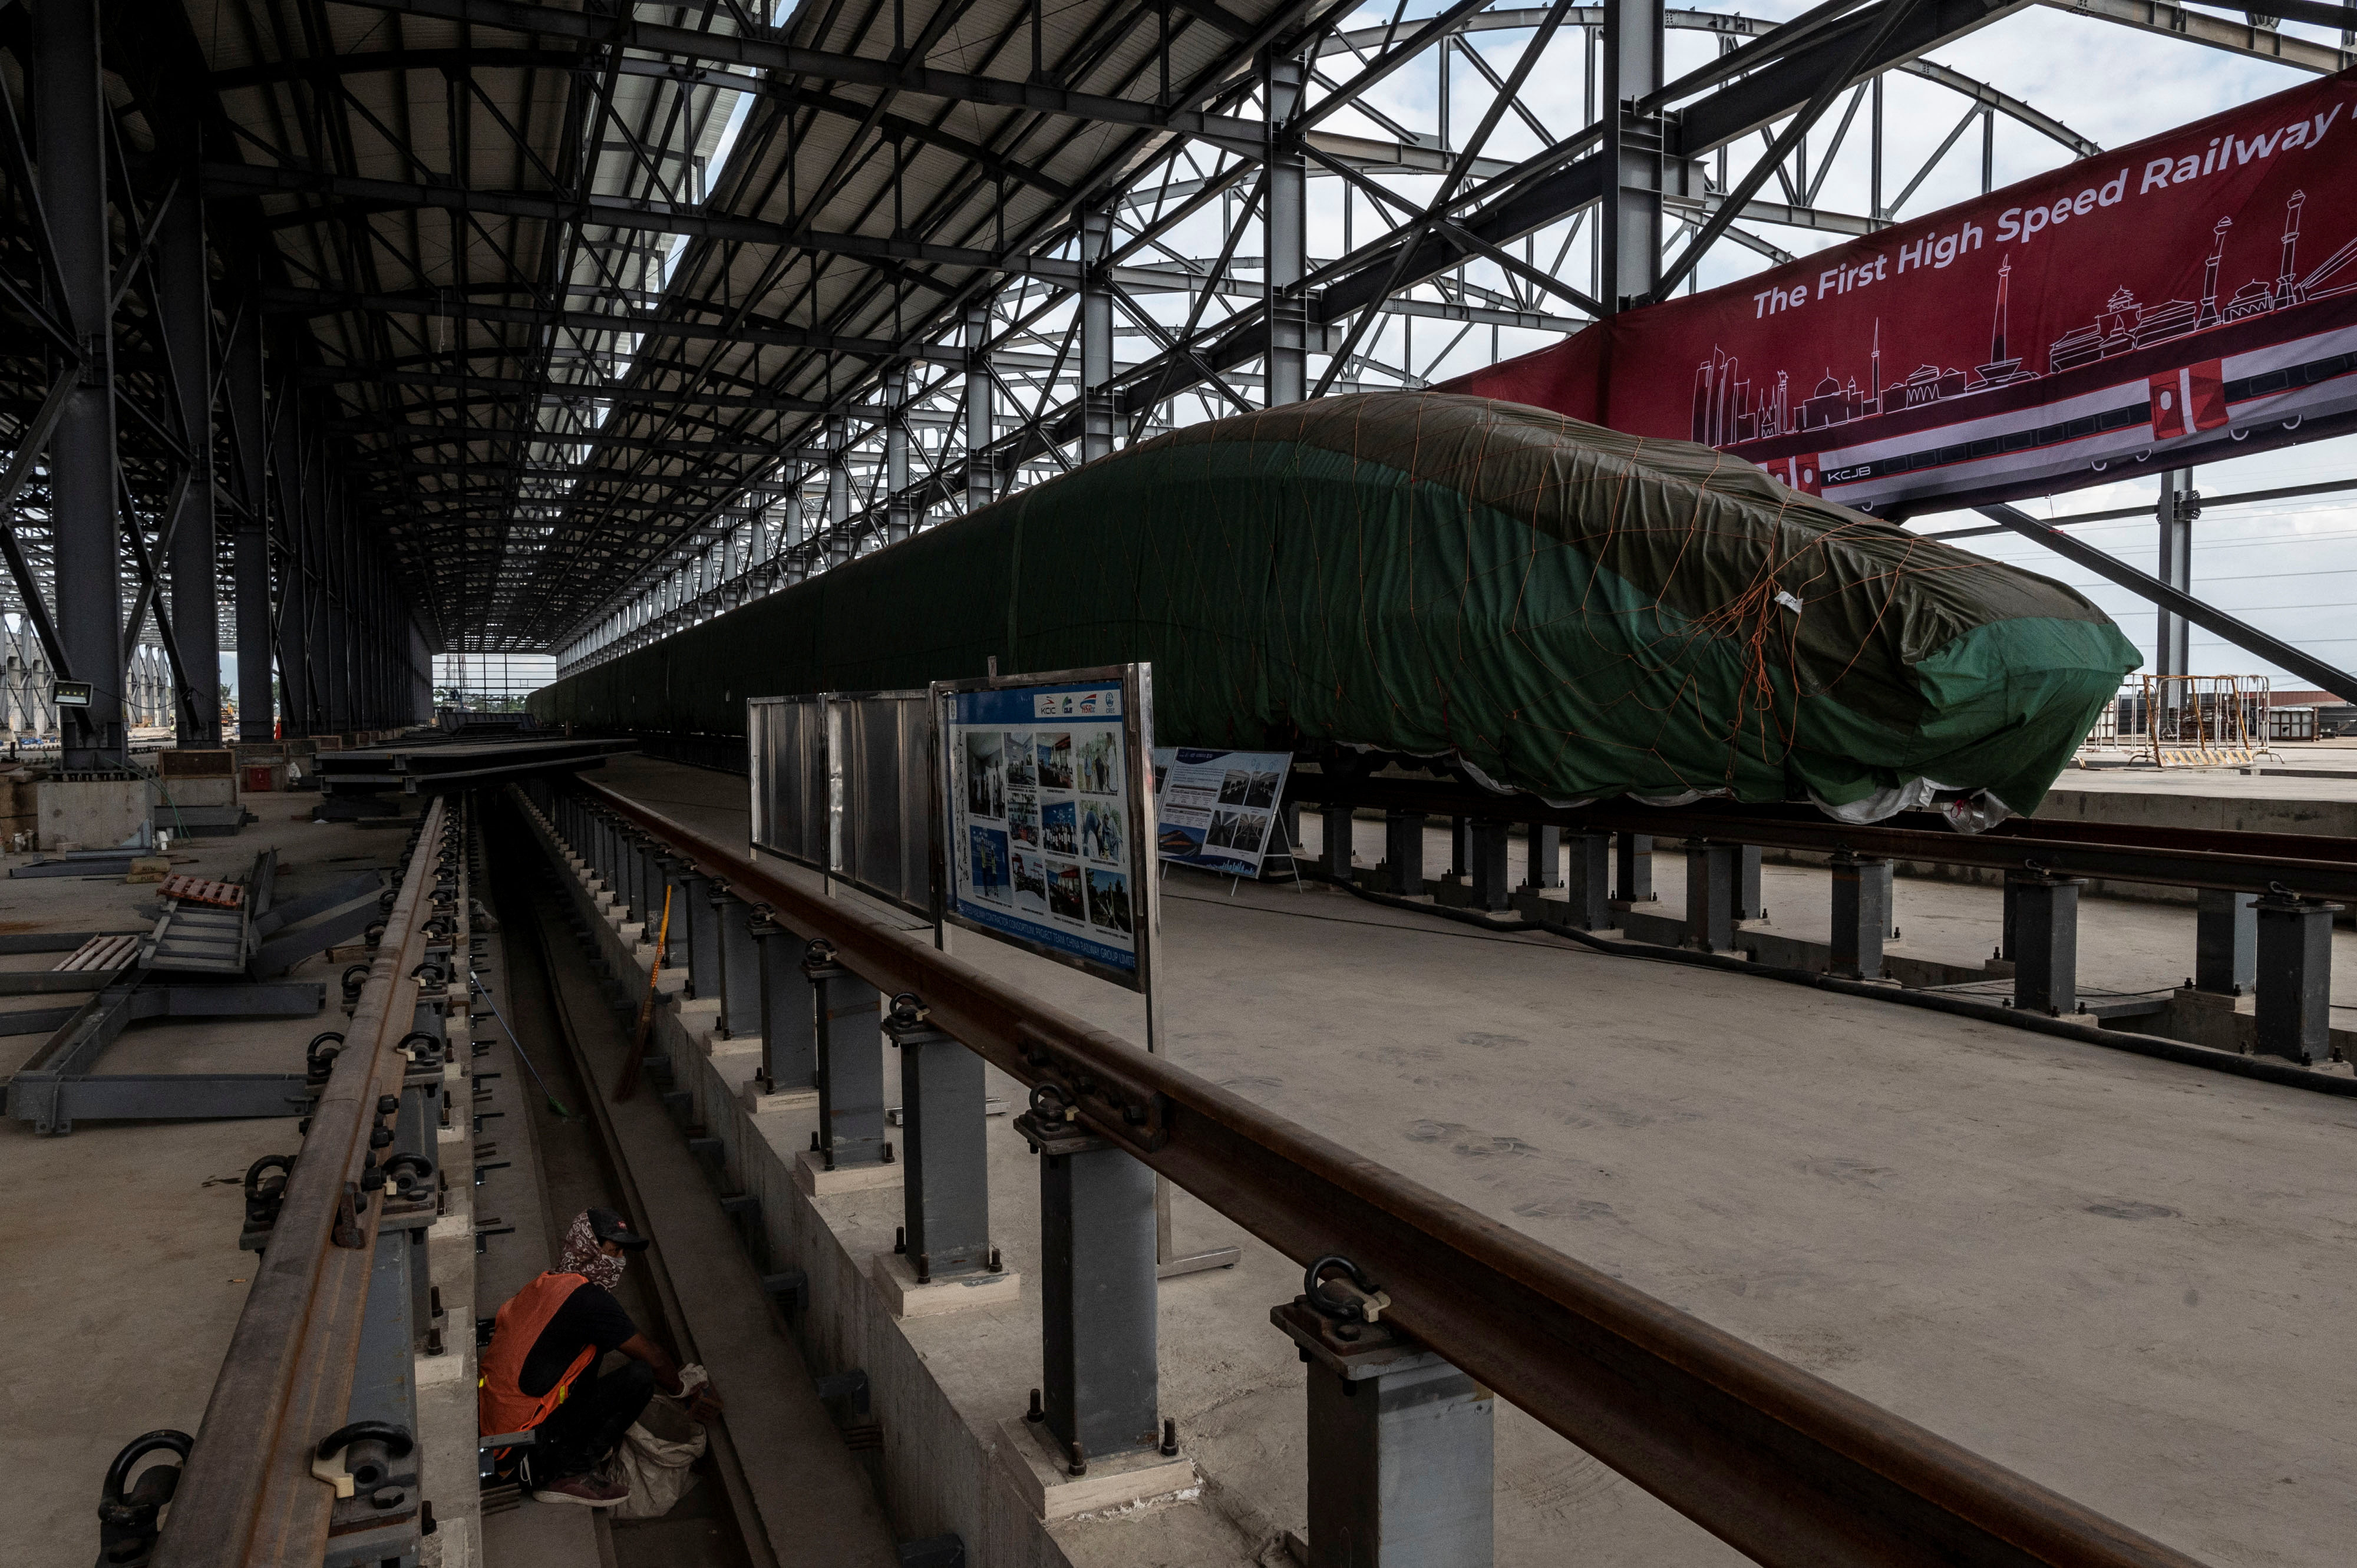 A high-speed train for a rail link project, which is part of China’s Belt and Road Initiative, sits at the Tegalluar train depot construction site in Bandung, West Java, Indonesia, on October 1. Photo: Reuters